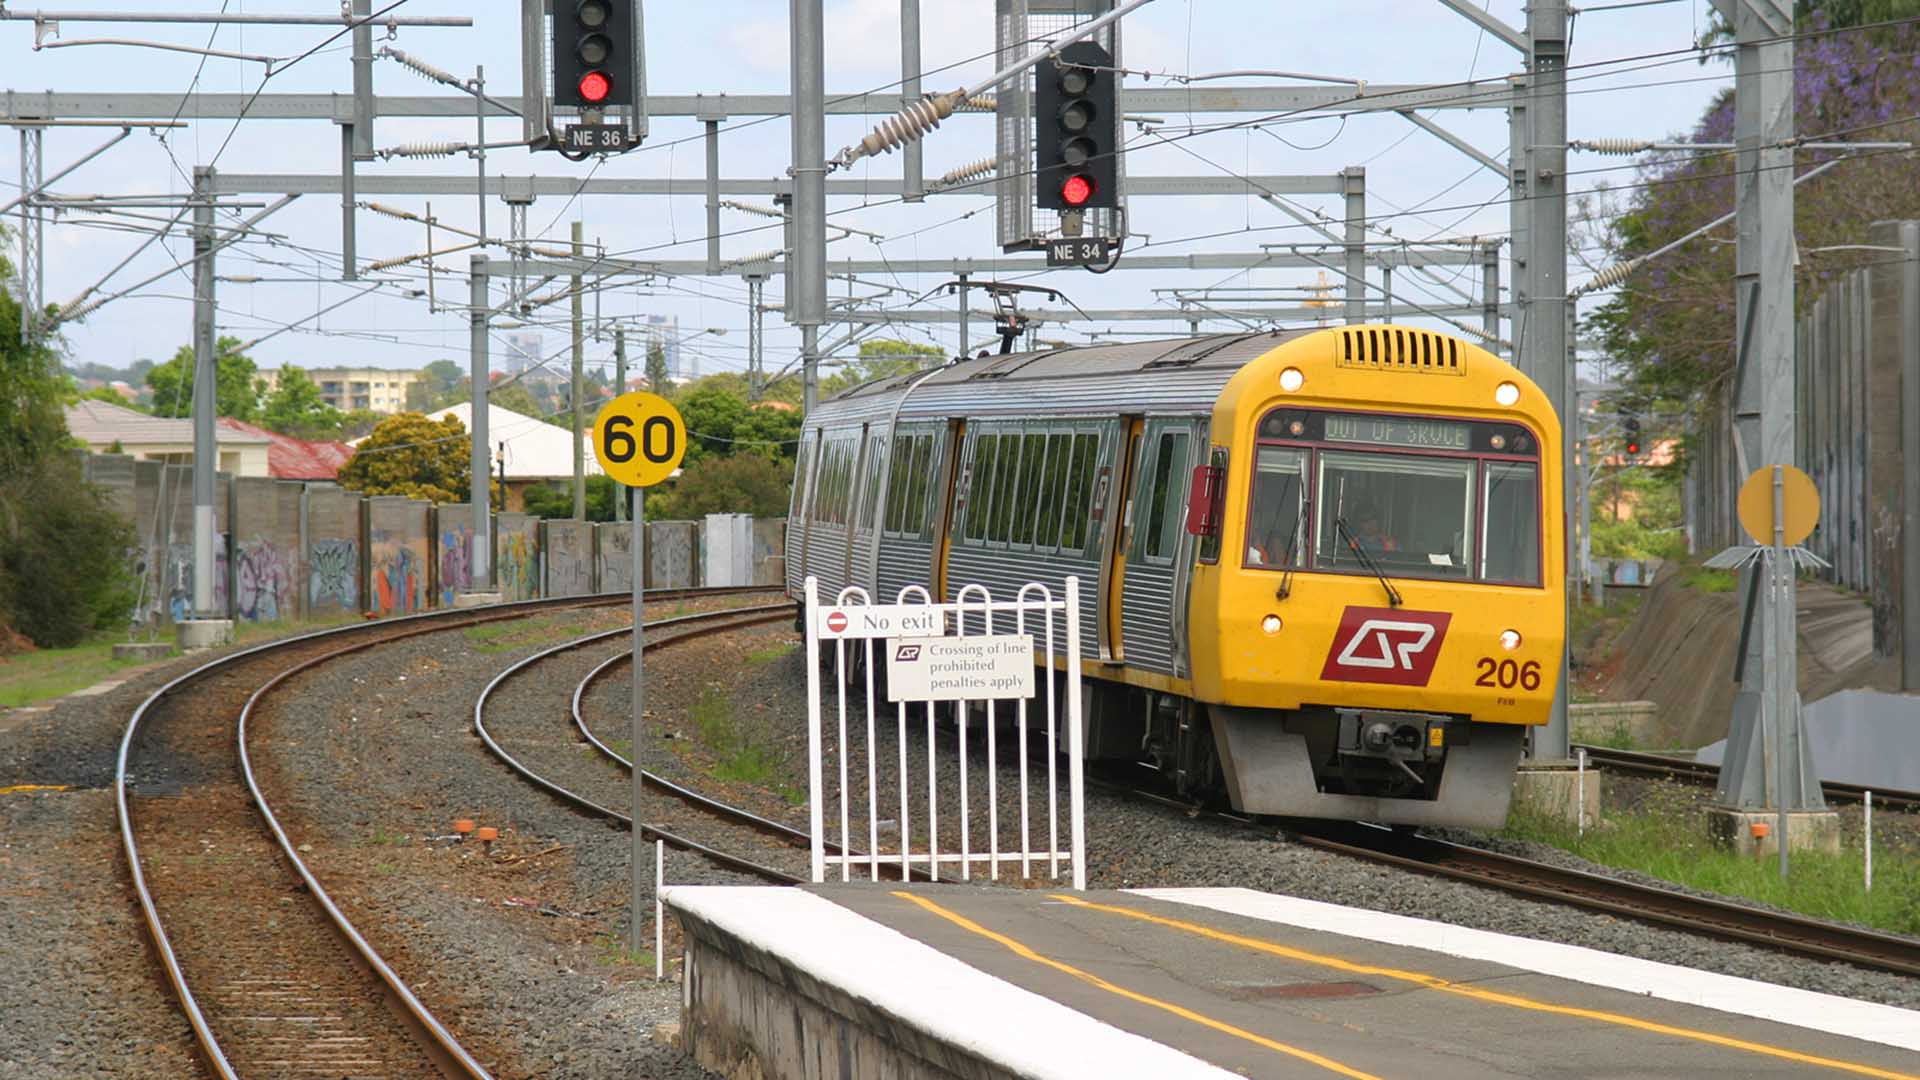 Brisbane Commuters Will Receive Four Days of Free Train Travel Over the Next Month